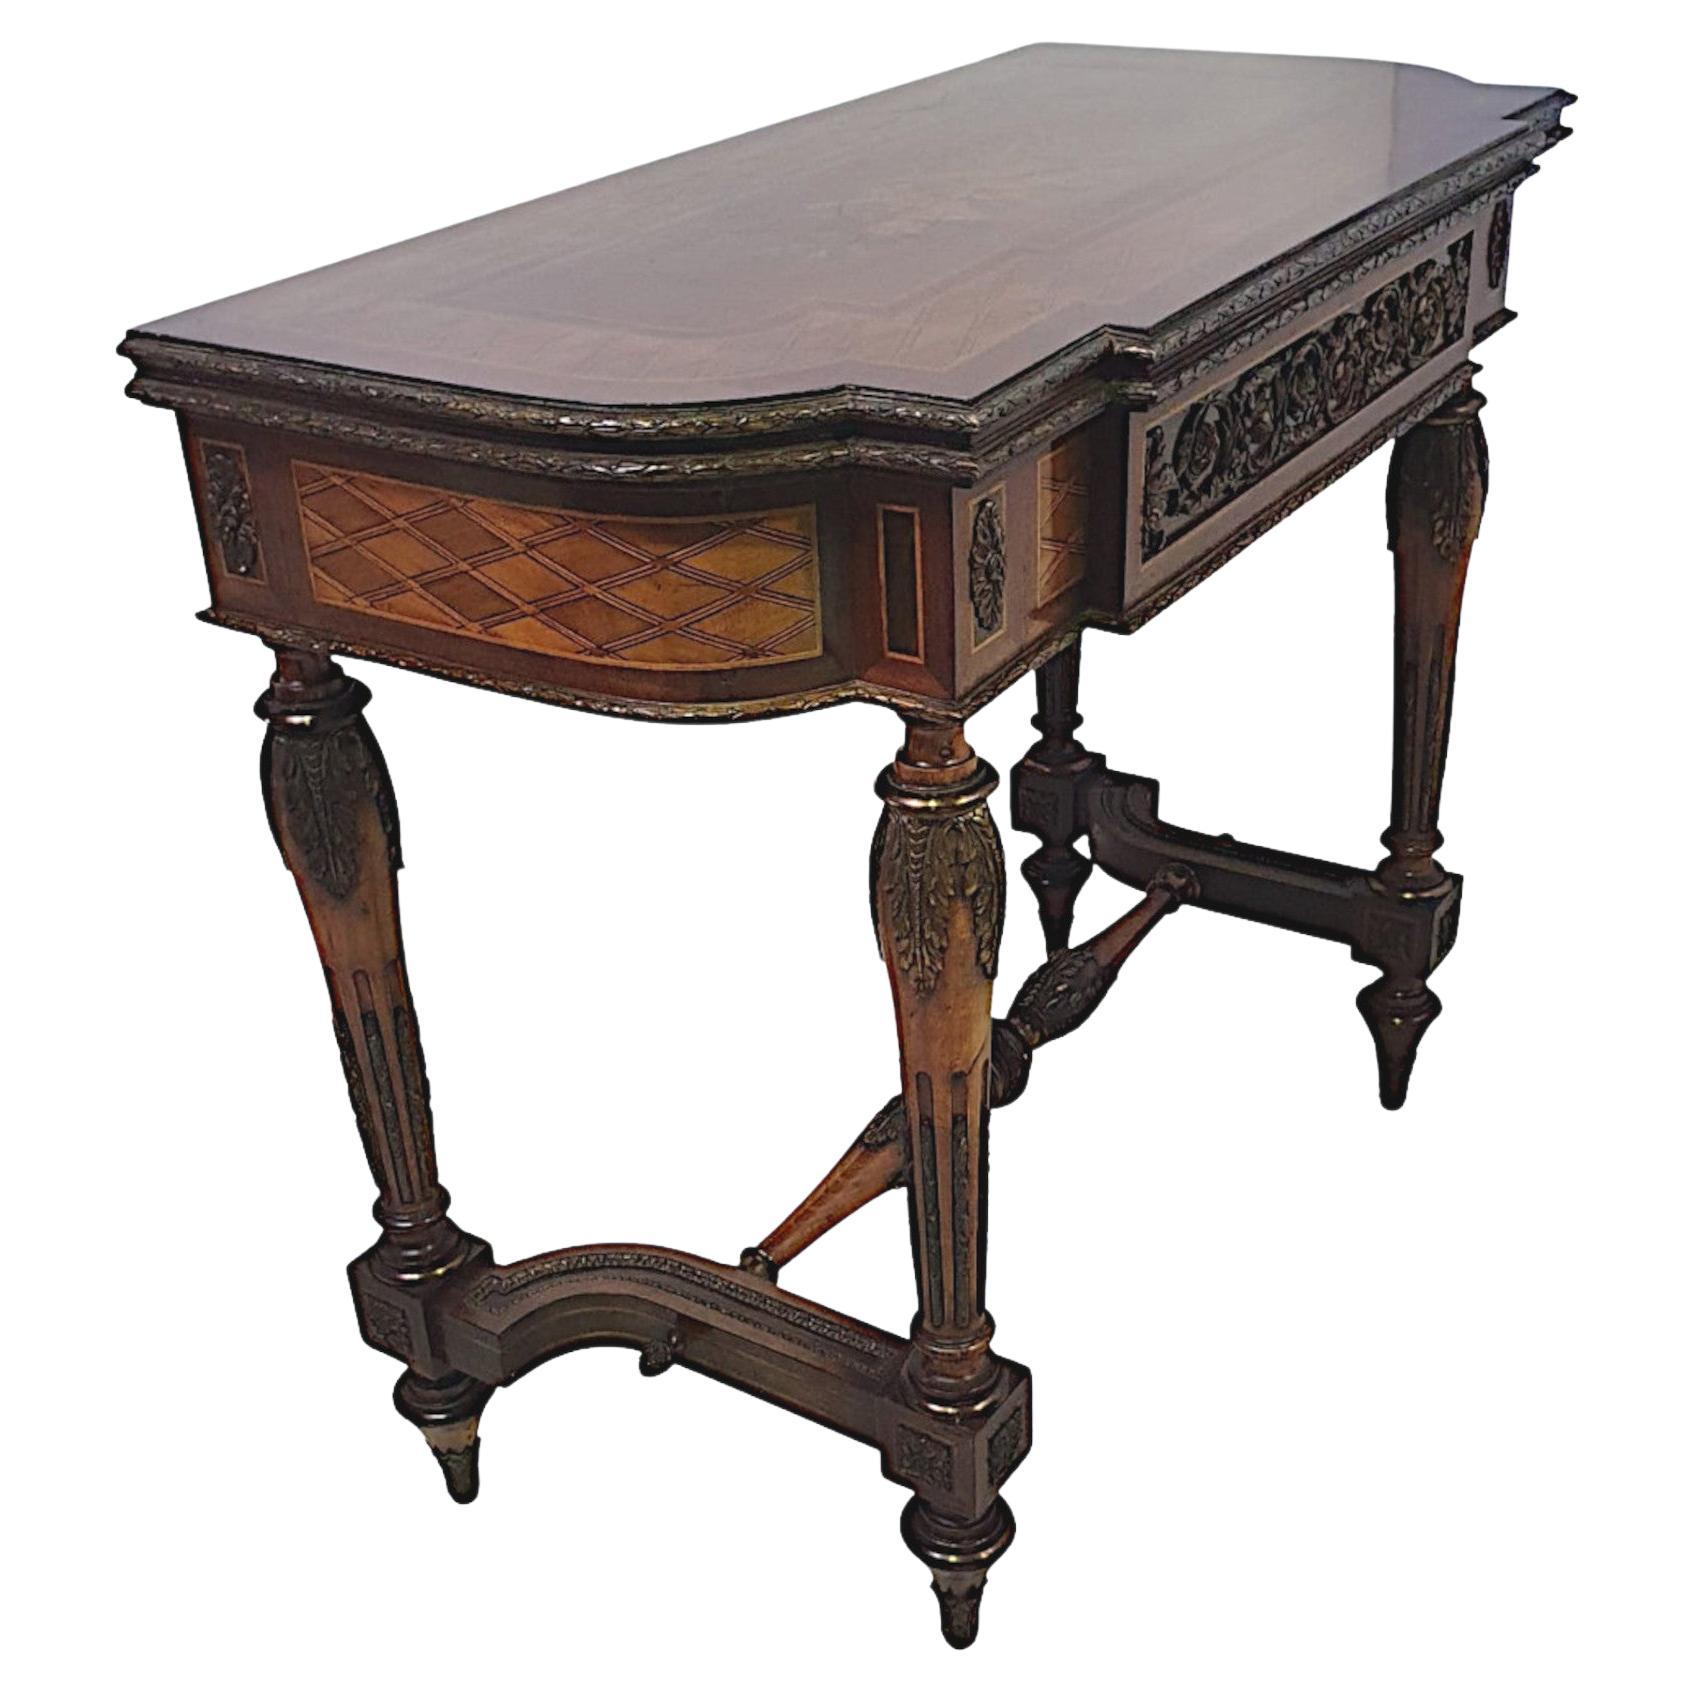 Very Fine and Rare 19th Century Museum Quality Marquetry Inlaid Card Table For Sale